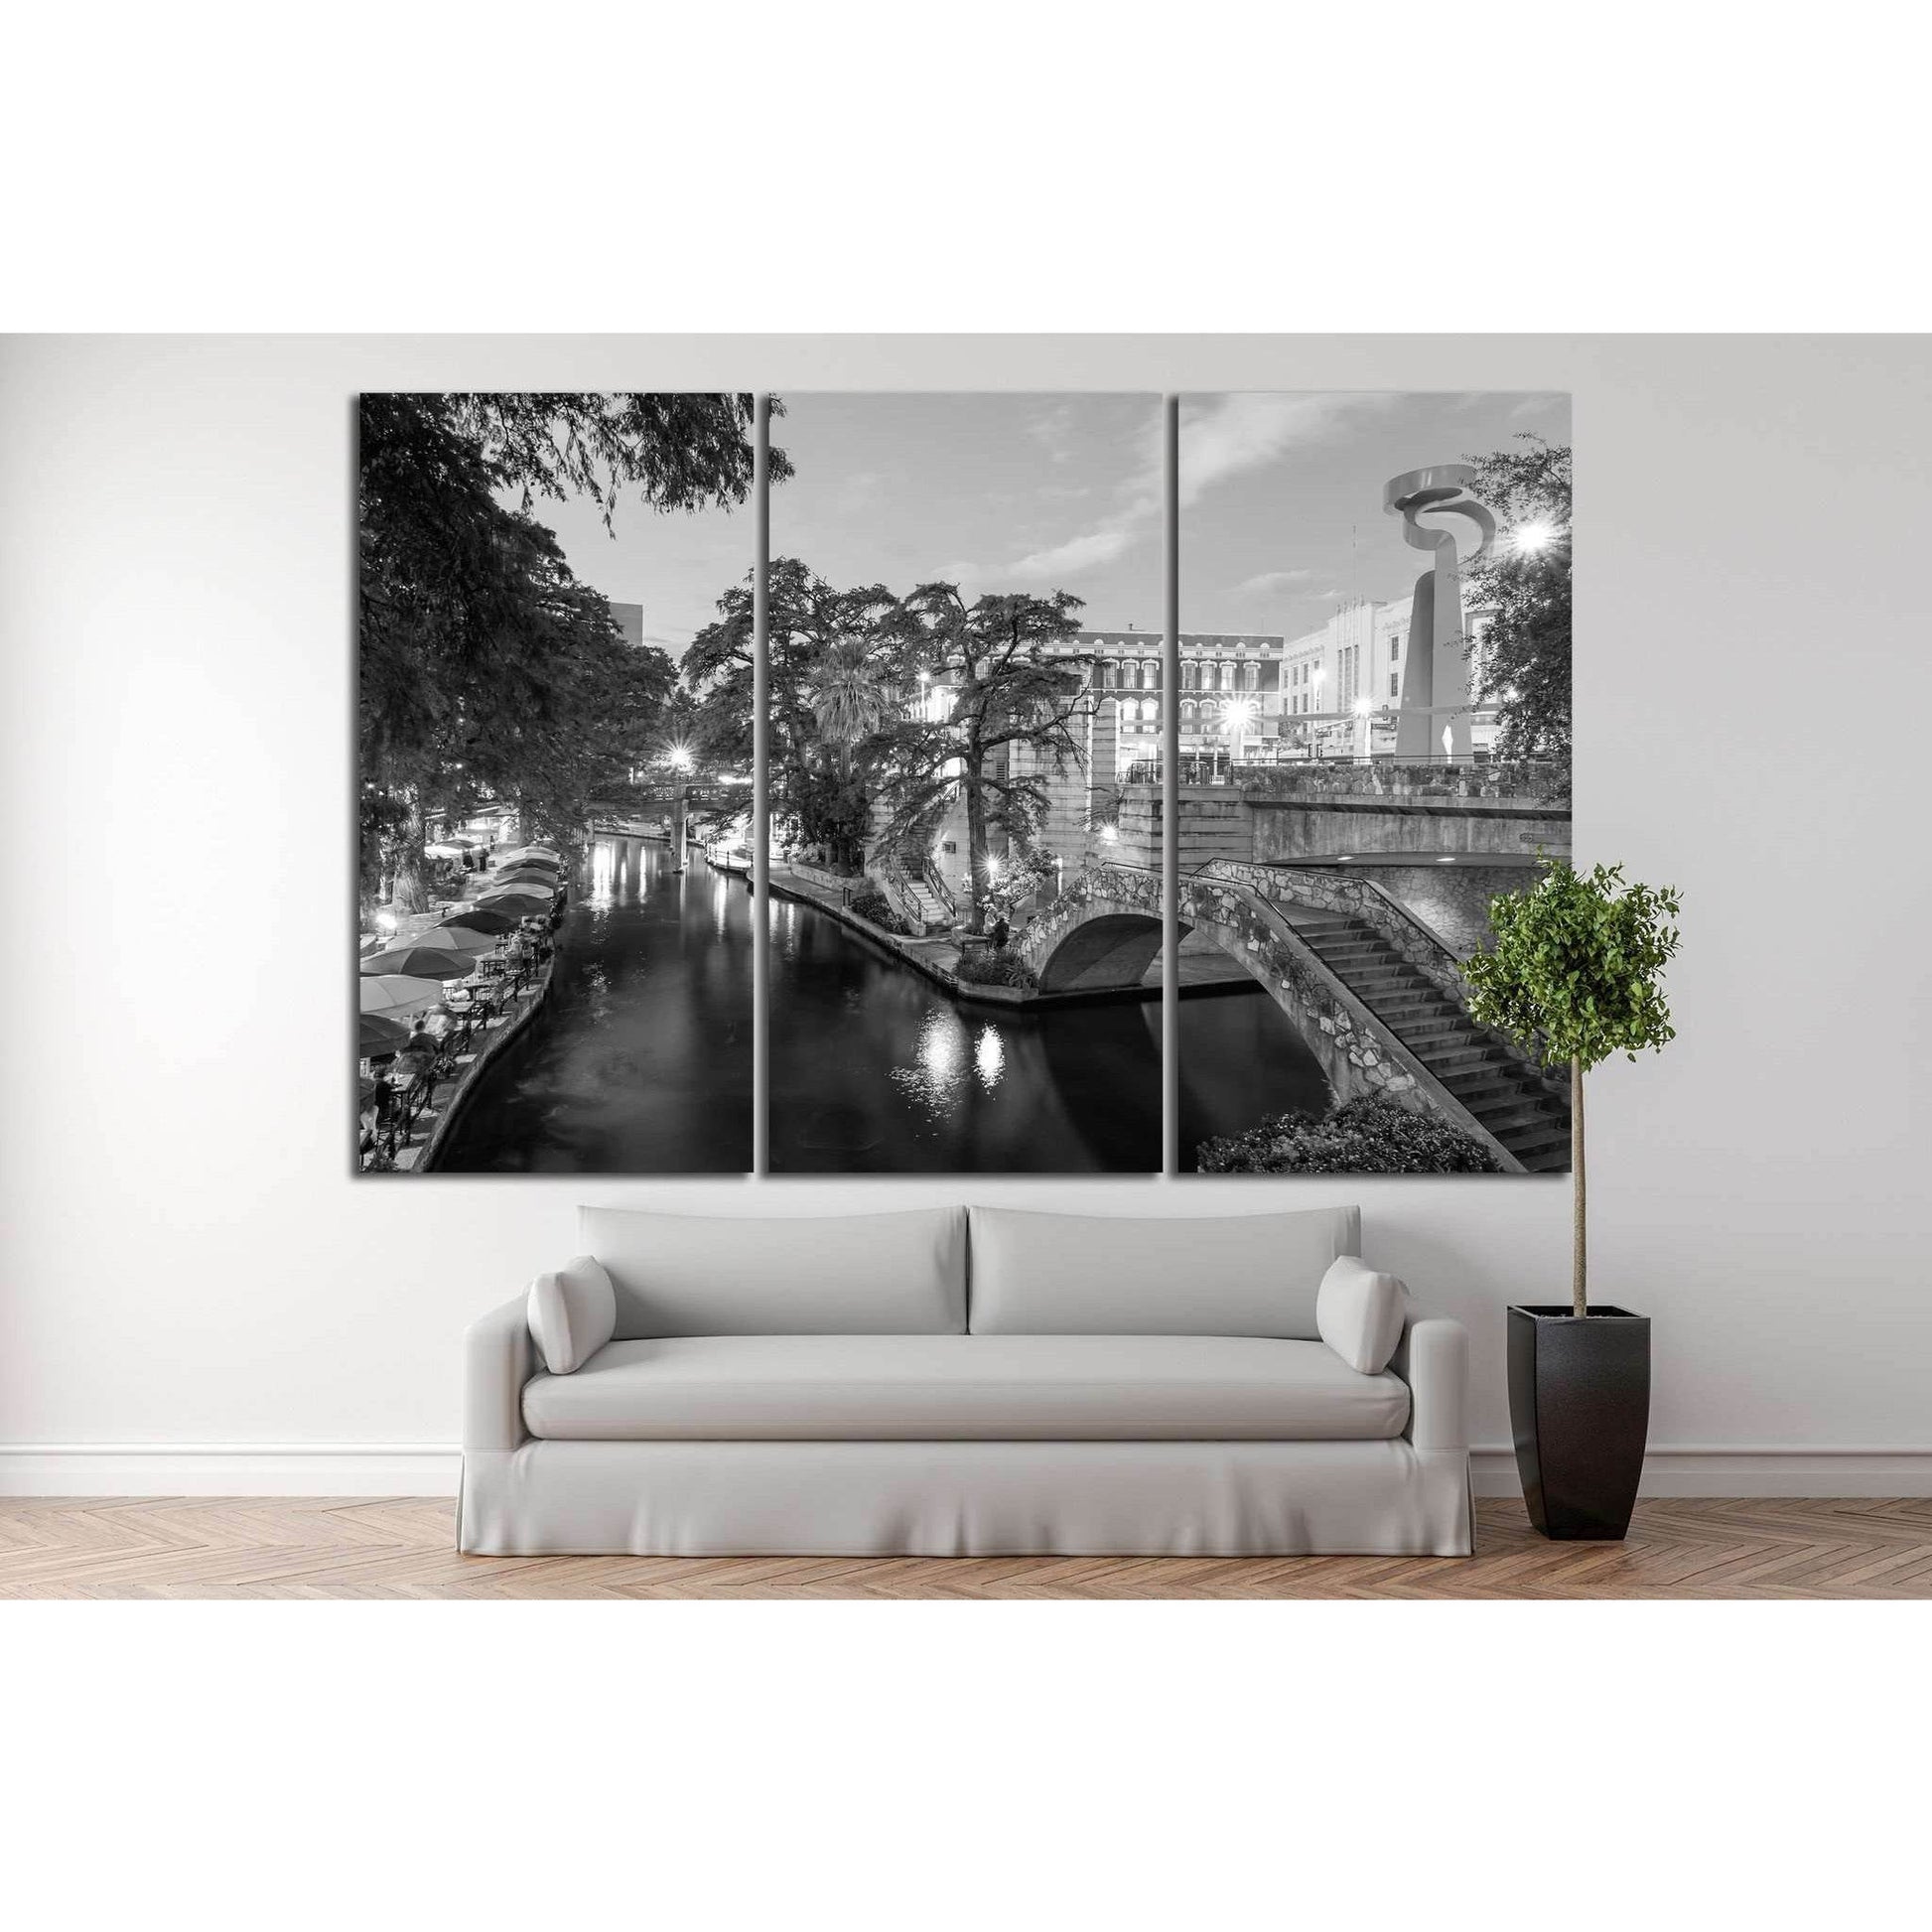 River Walk in San Antonio, Texas №996 Ready to Hang Canvas PrintThis canvas print presents a serene monochrome cityscape featuring a tranquil canal, lined with historic architecture and lush trees. The reflection of the urban elements on the water's surfa